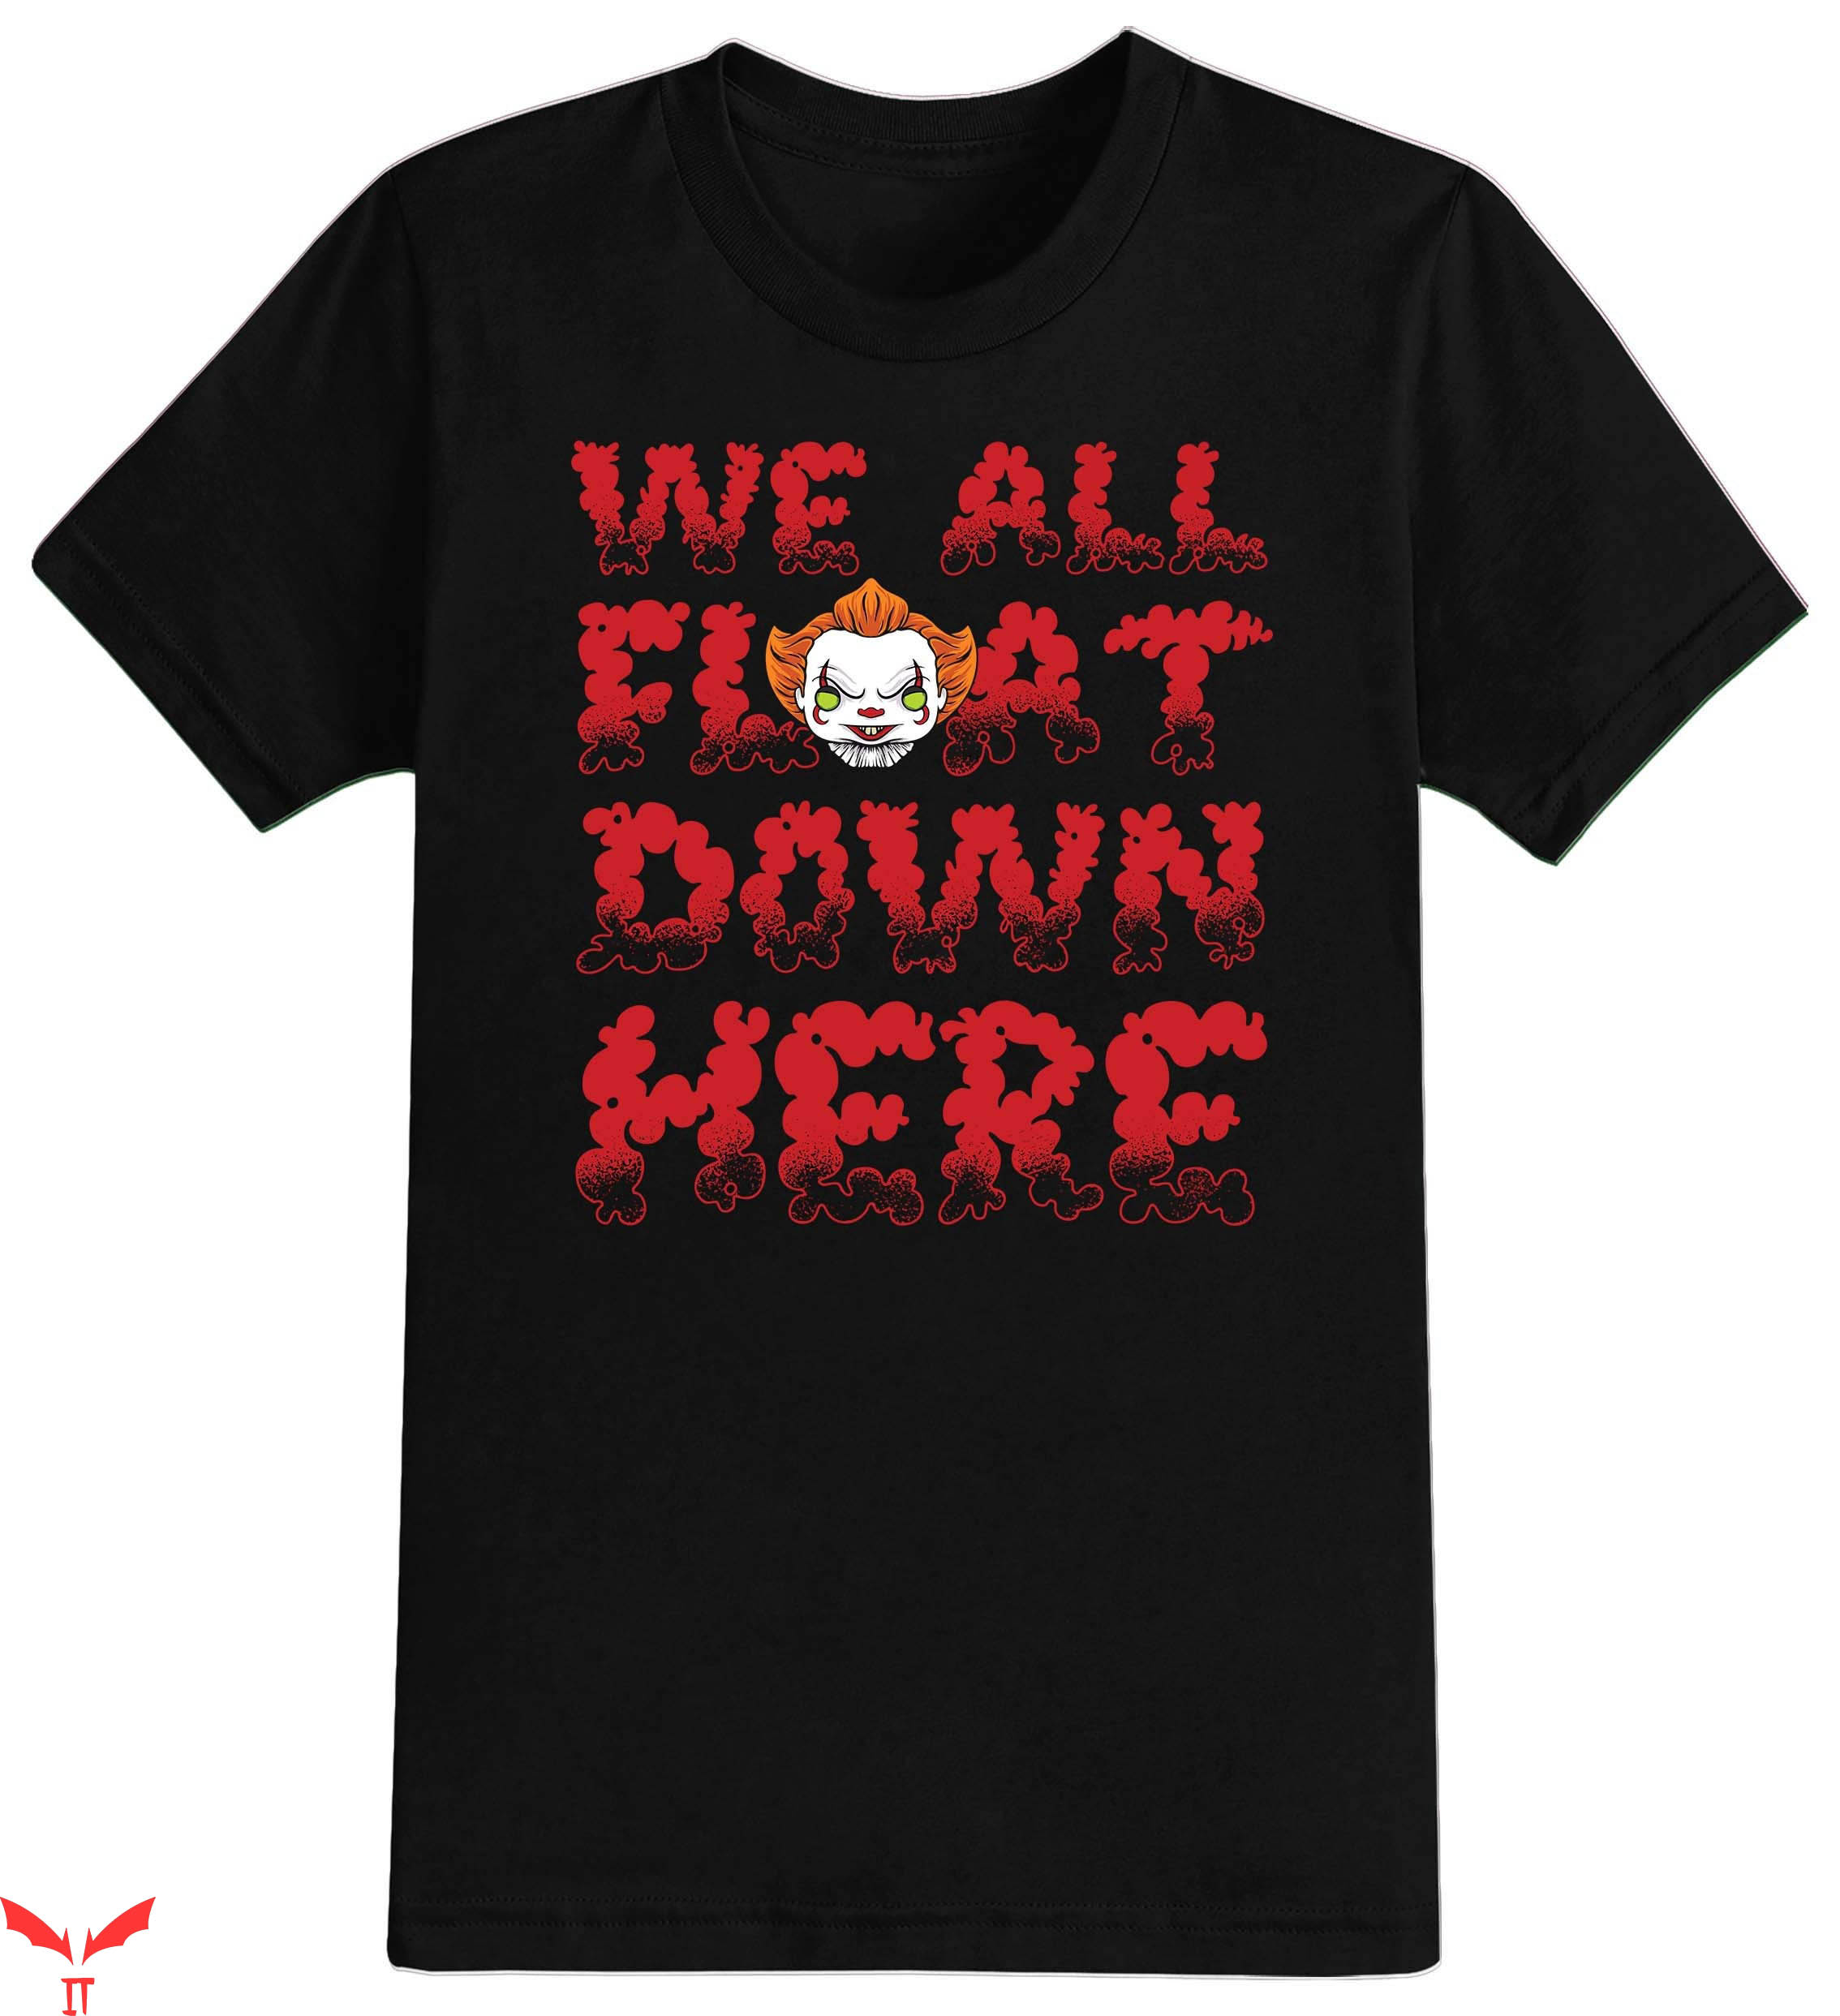 IT The Clown T-Shirt  We All Float Down Here Scary Clown